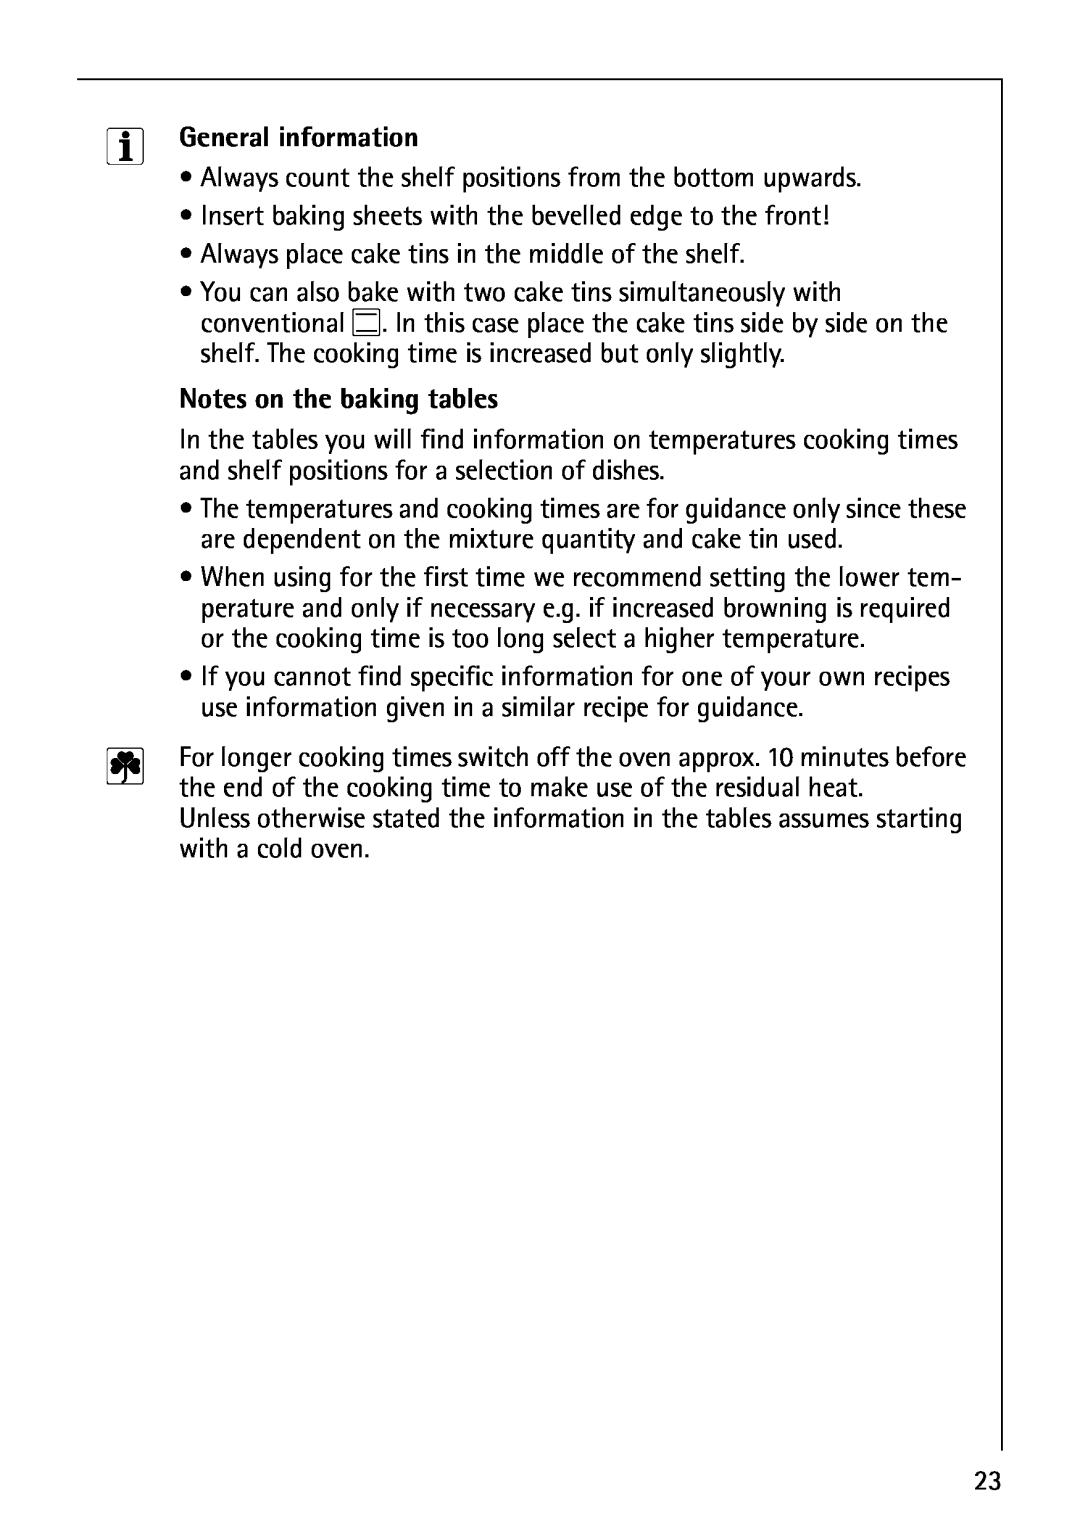 Electrolux B1100-2 manual Notes on the baking tables, General information 